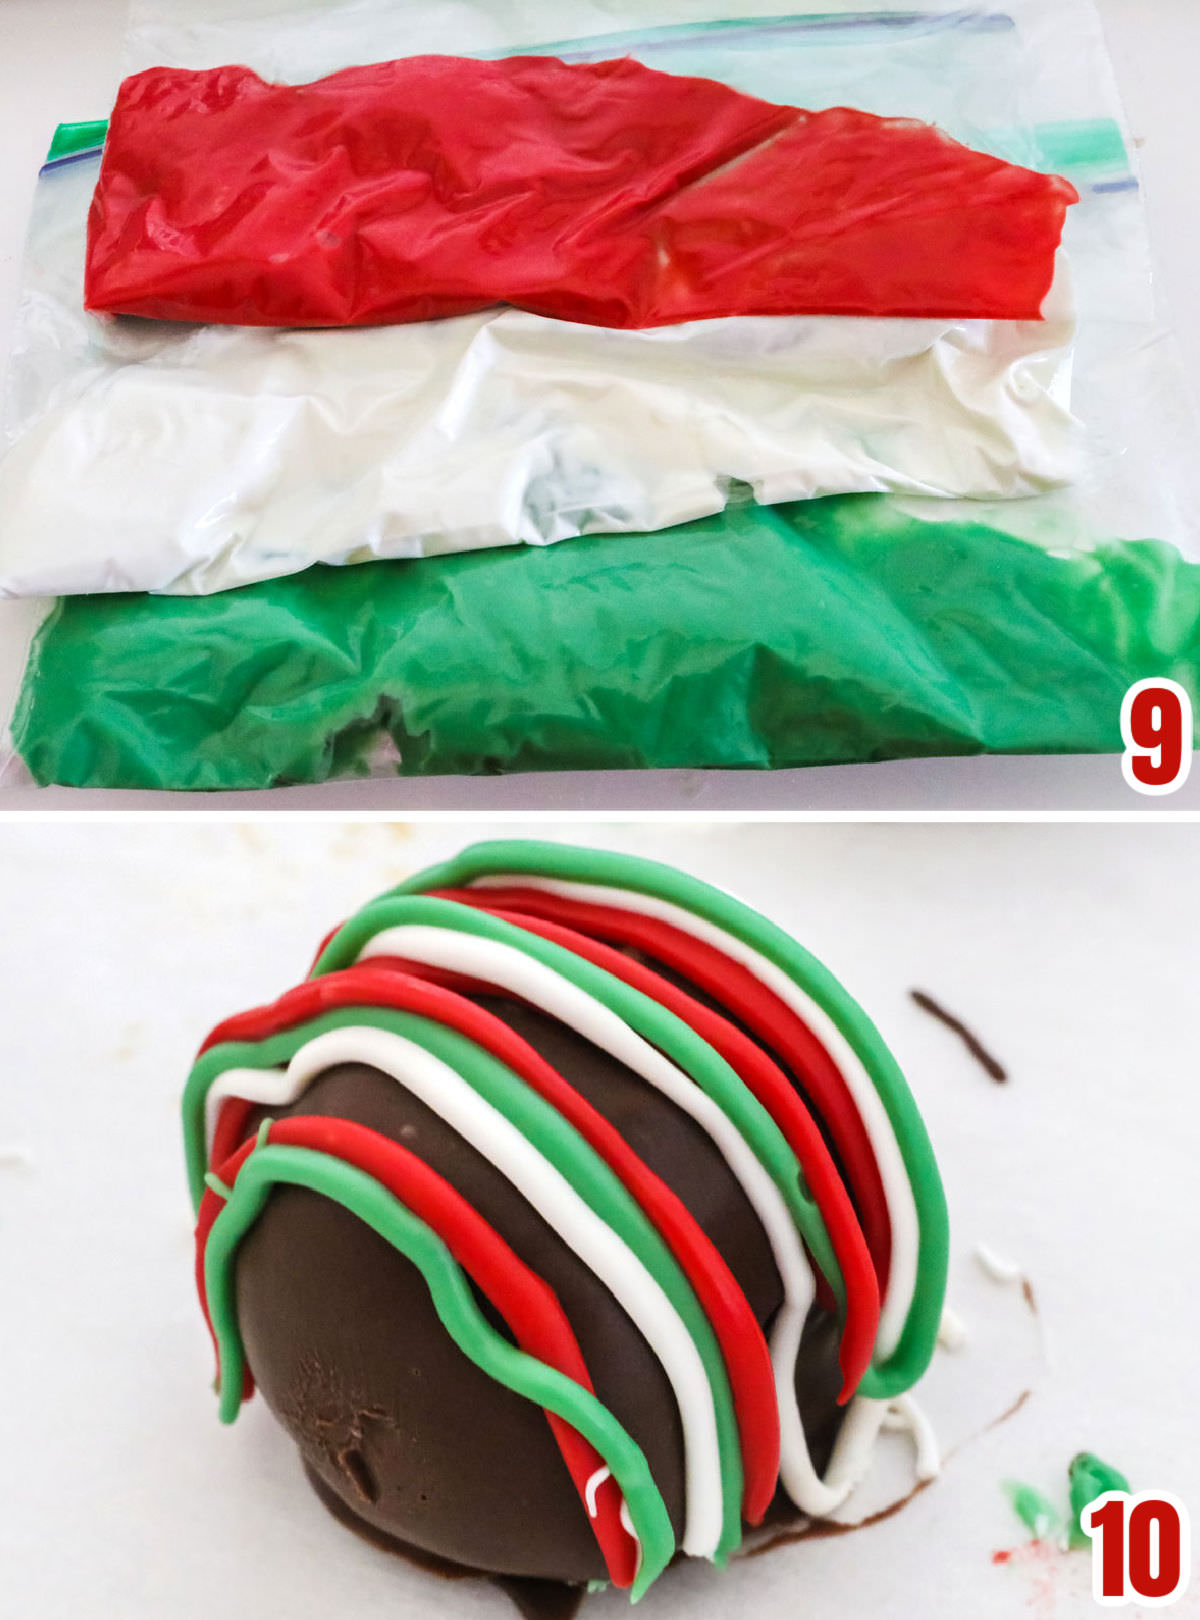 Collage image showing the steps for drizzling melted candy melts on the chocolate candy.